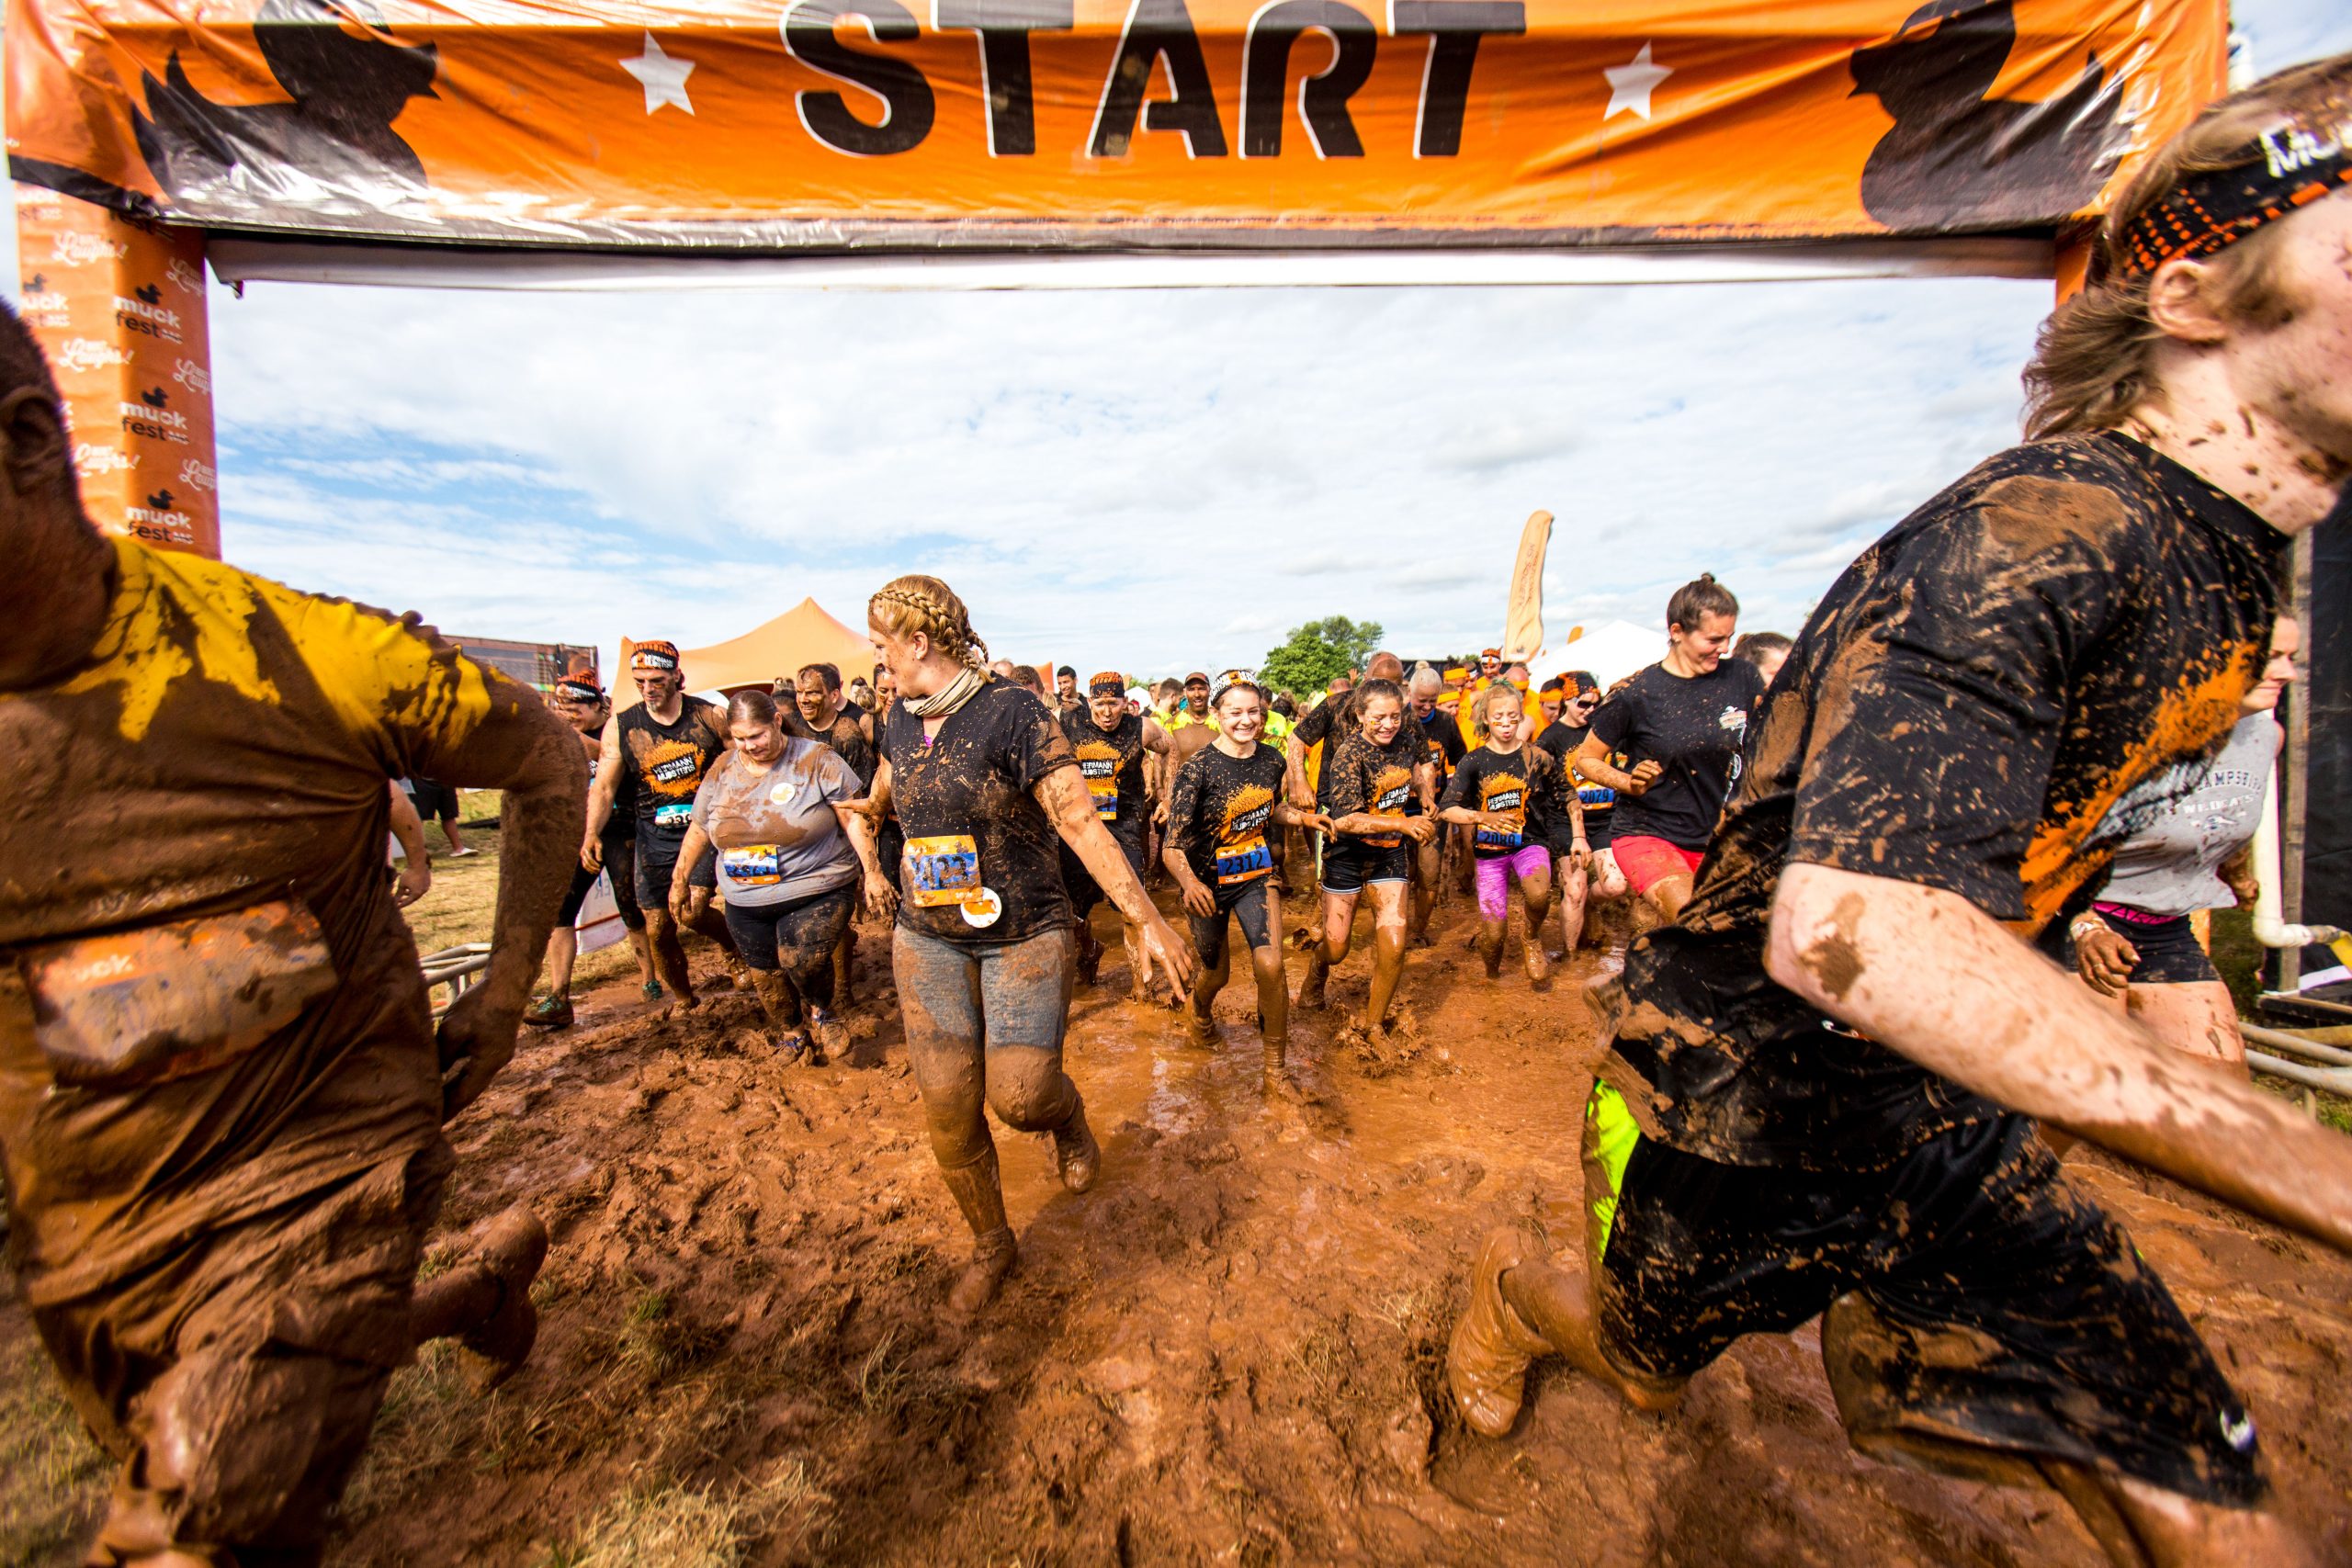 MuckFest The FamilyFriendly FUN Mud Run is Coming to Denver! » The